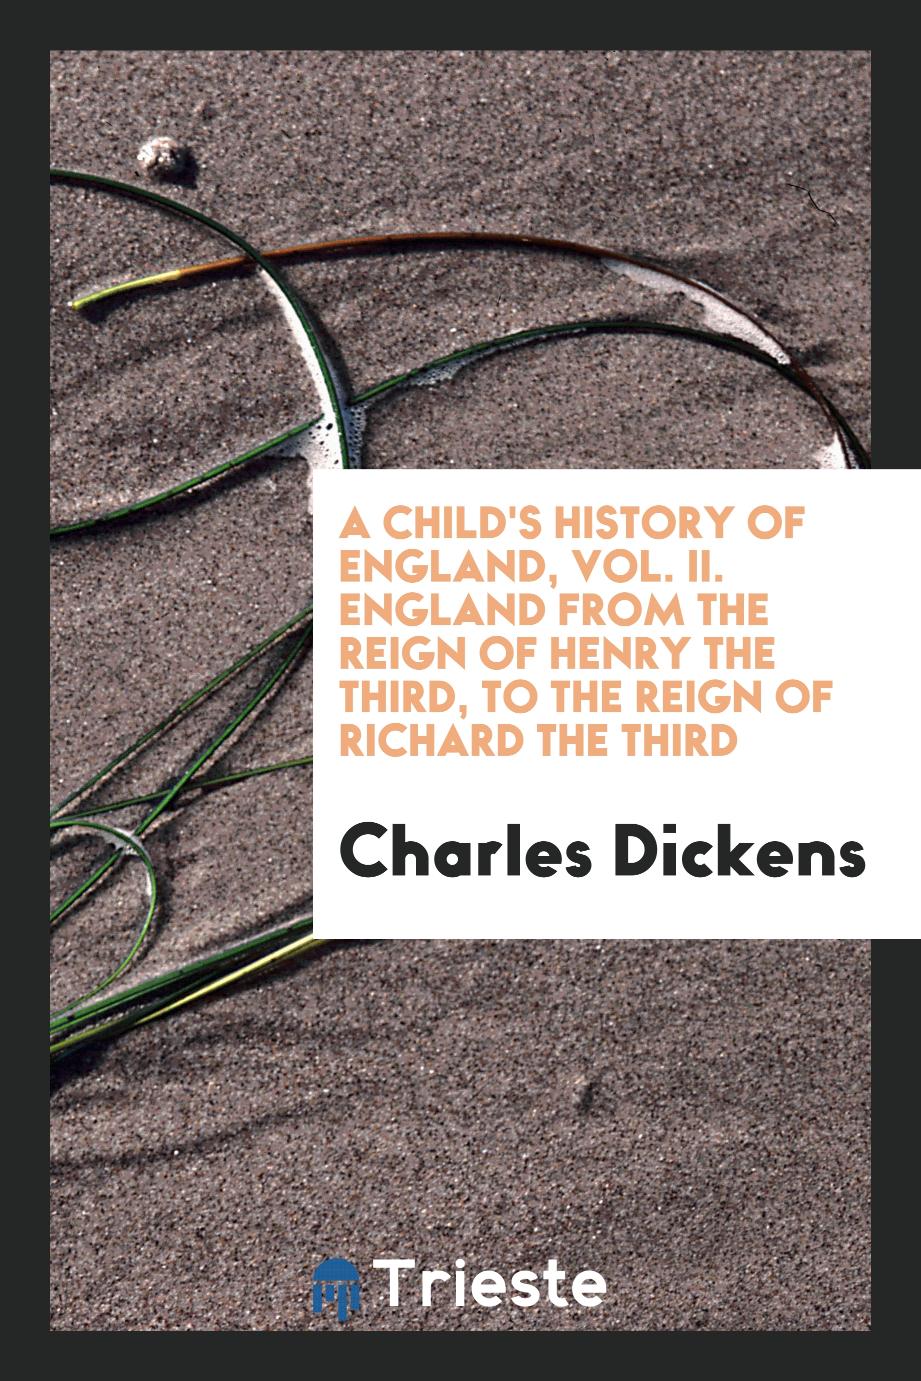 A child's history of England, Vol. II. England from the reign of Henry the Third, to the reign of Richard the third